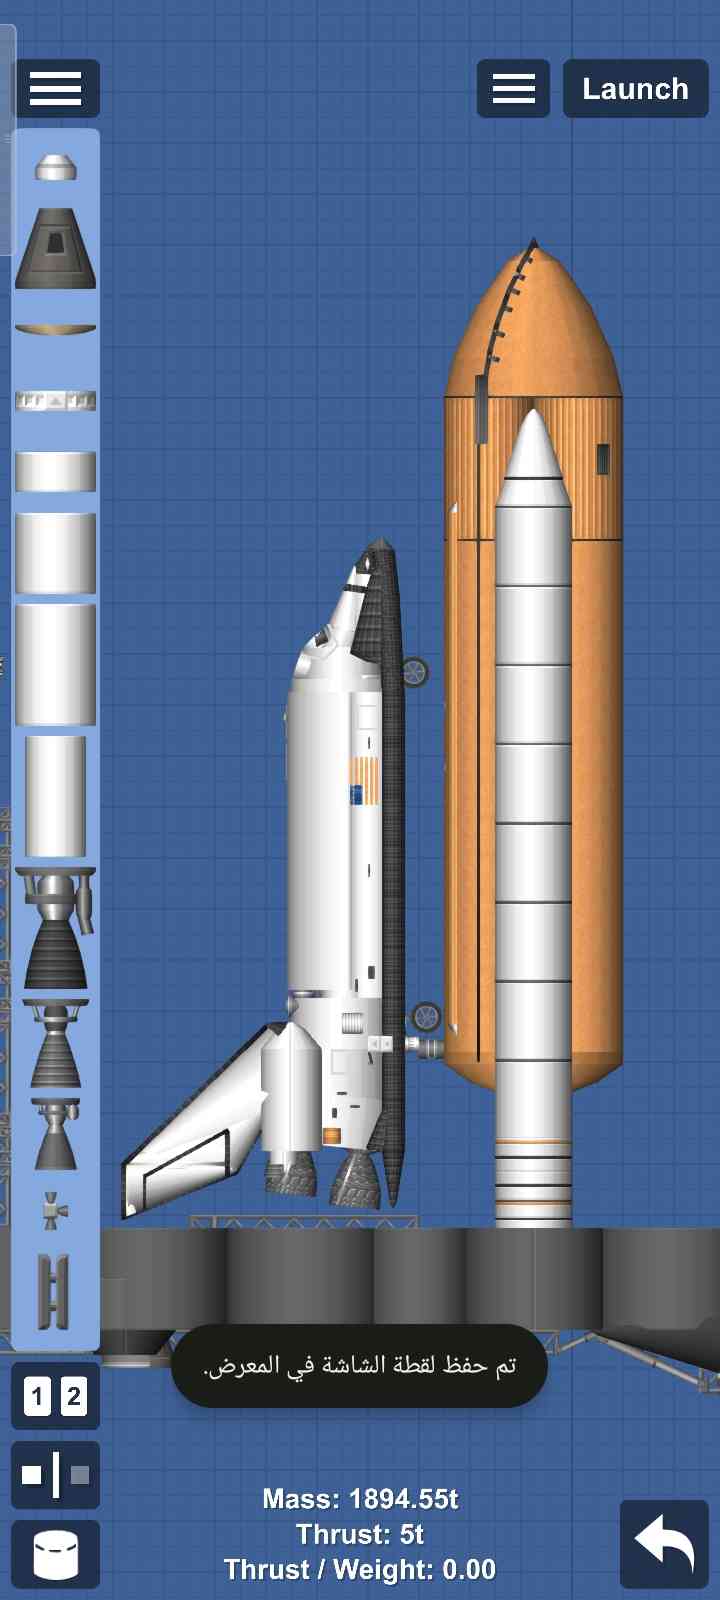 Shuttle space with nasa launch Blueprint for Spaceflight Simulator